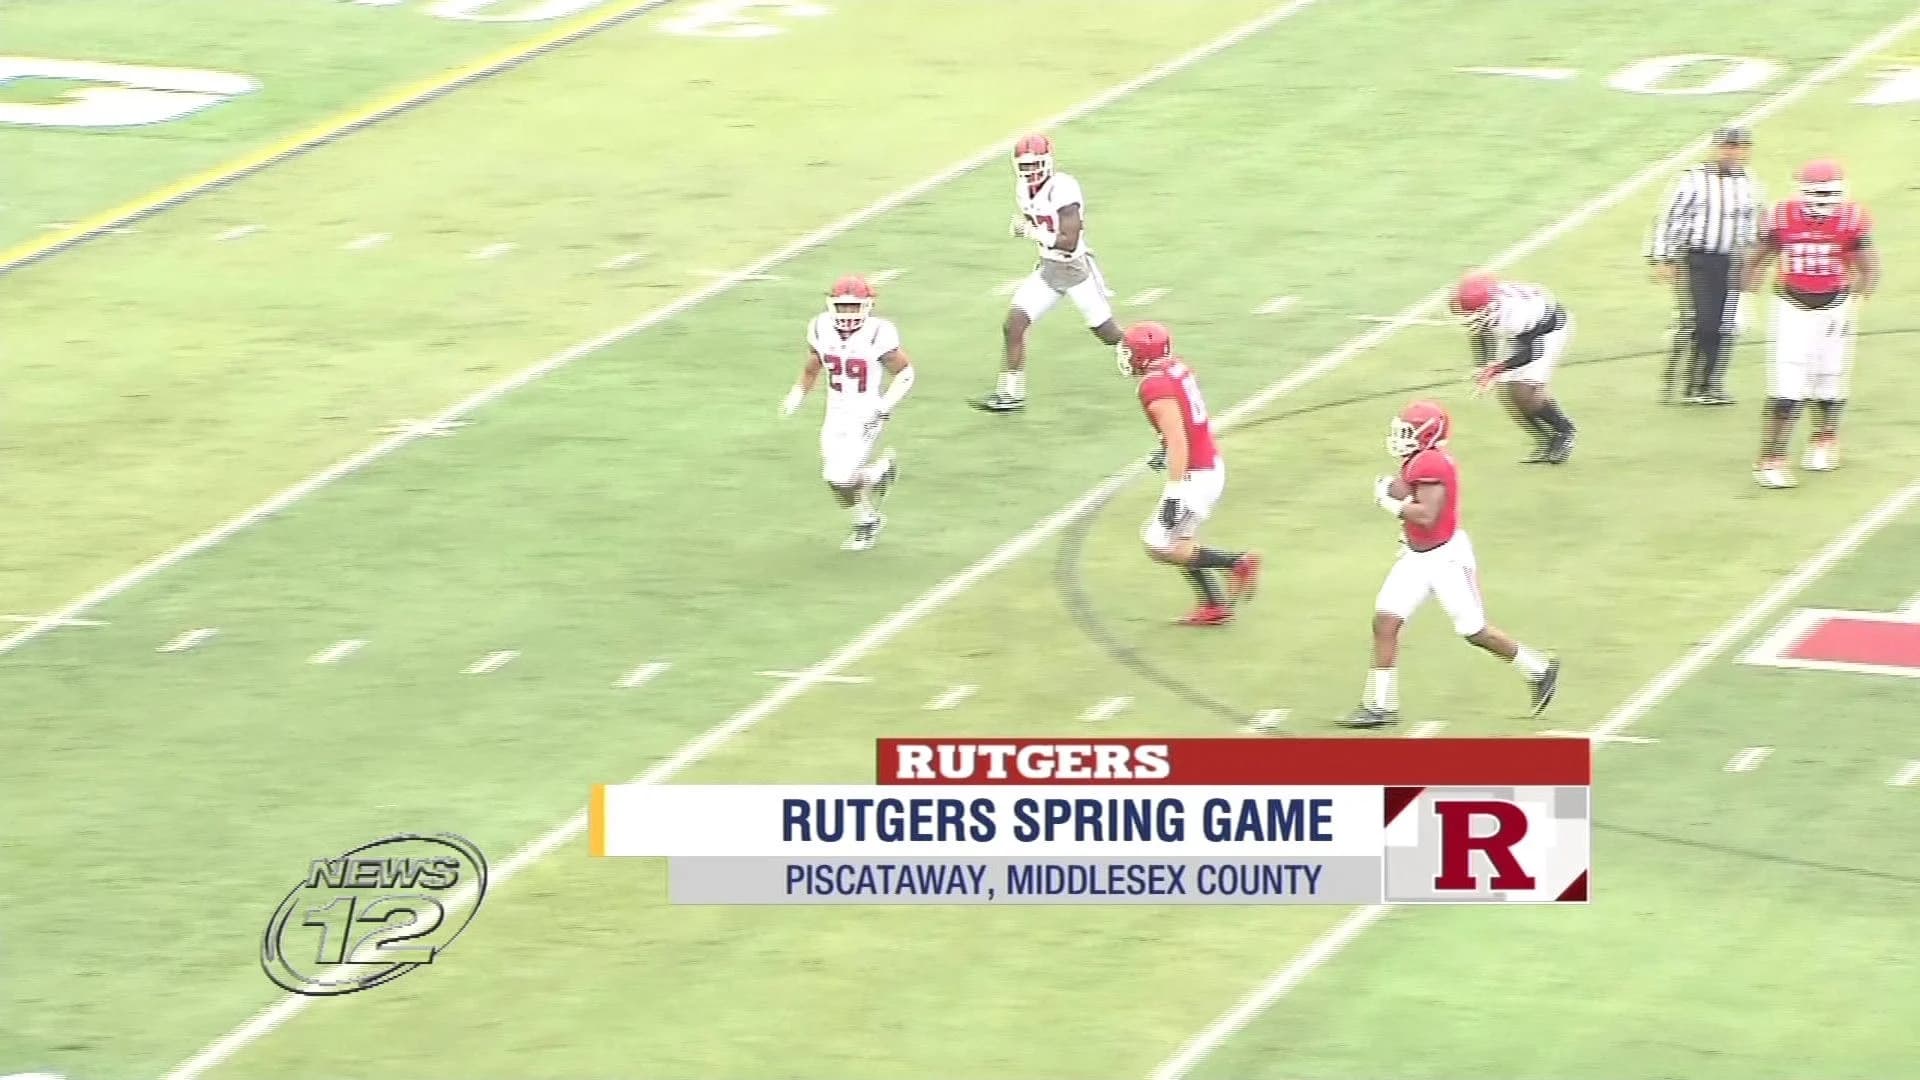 Falcons, Patriots coaches guest coach at Rutgers' spring game